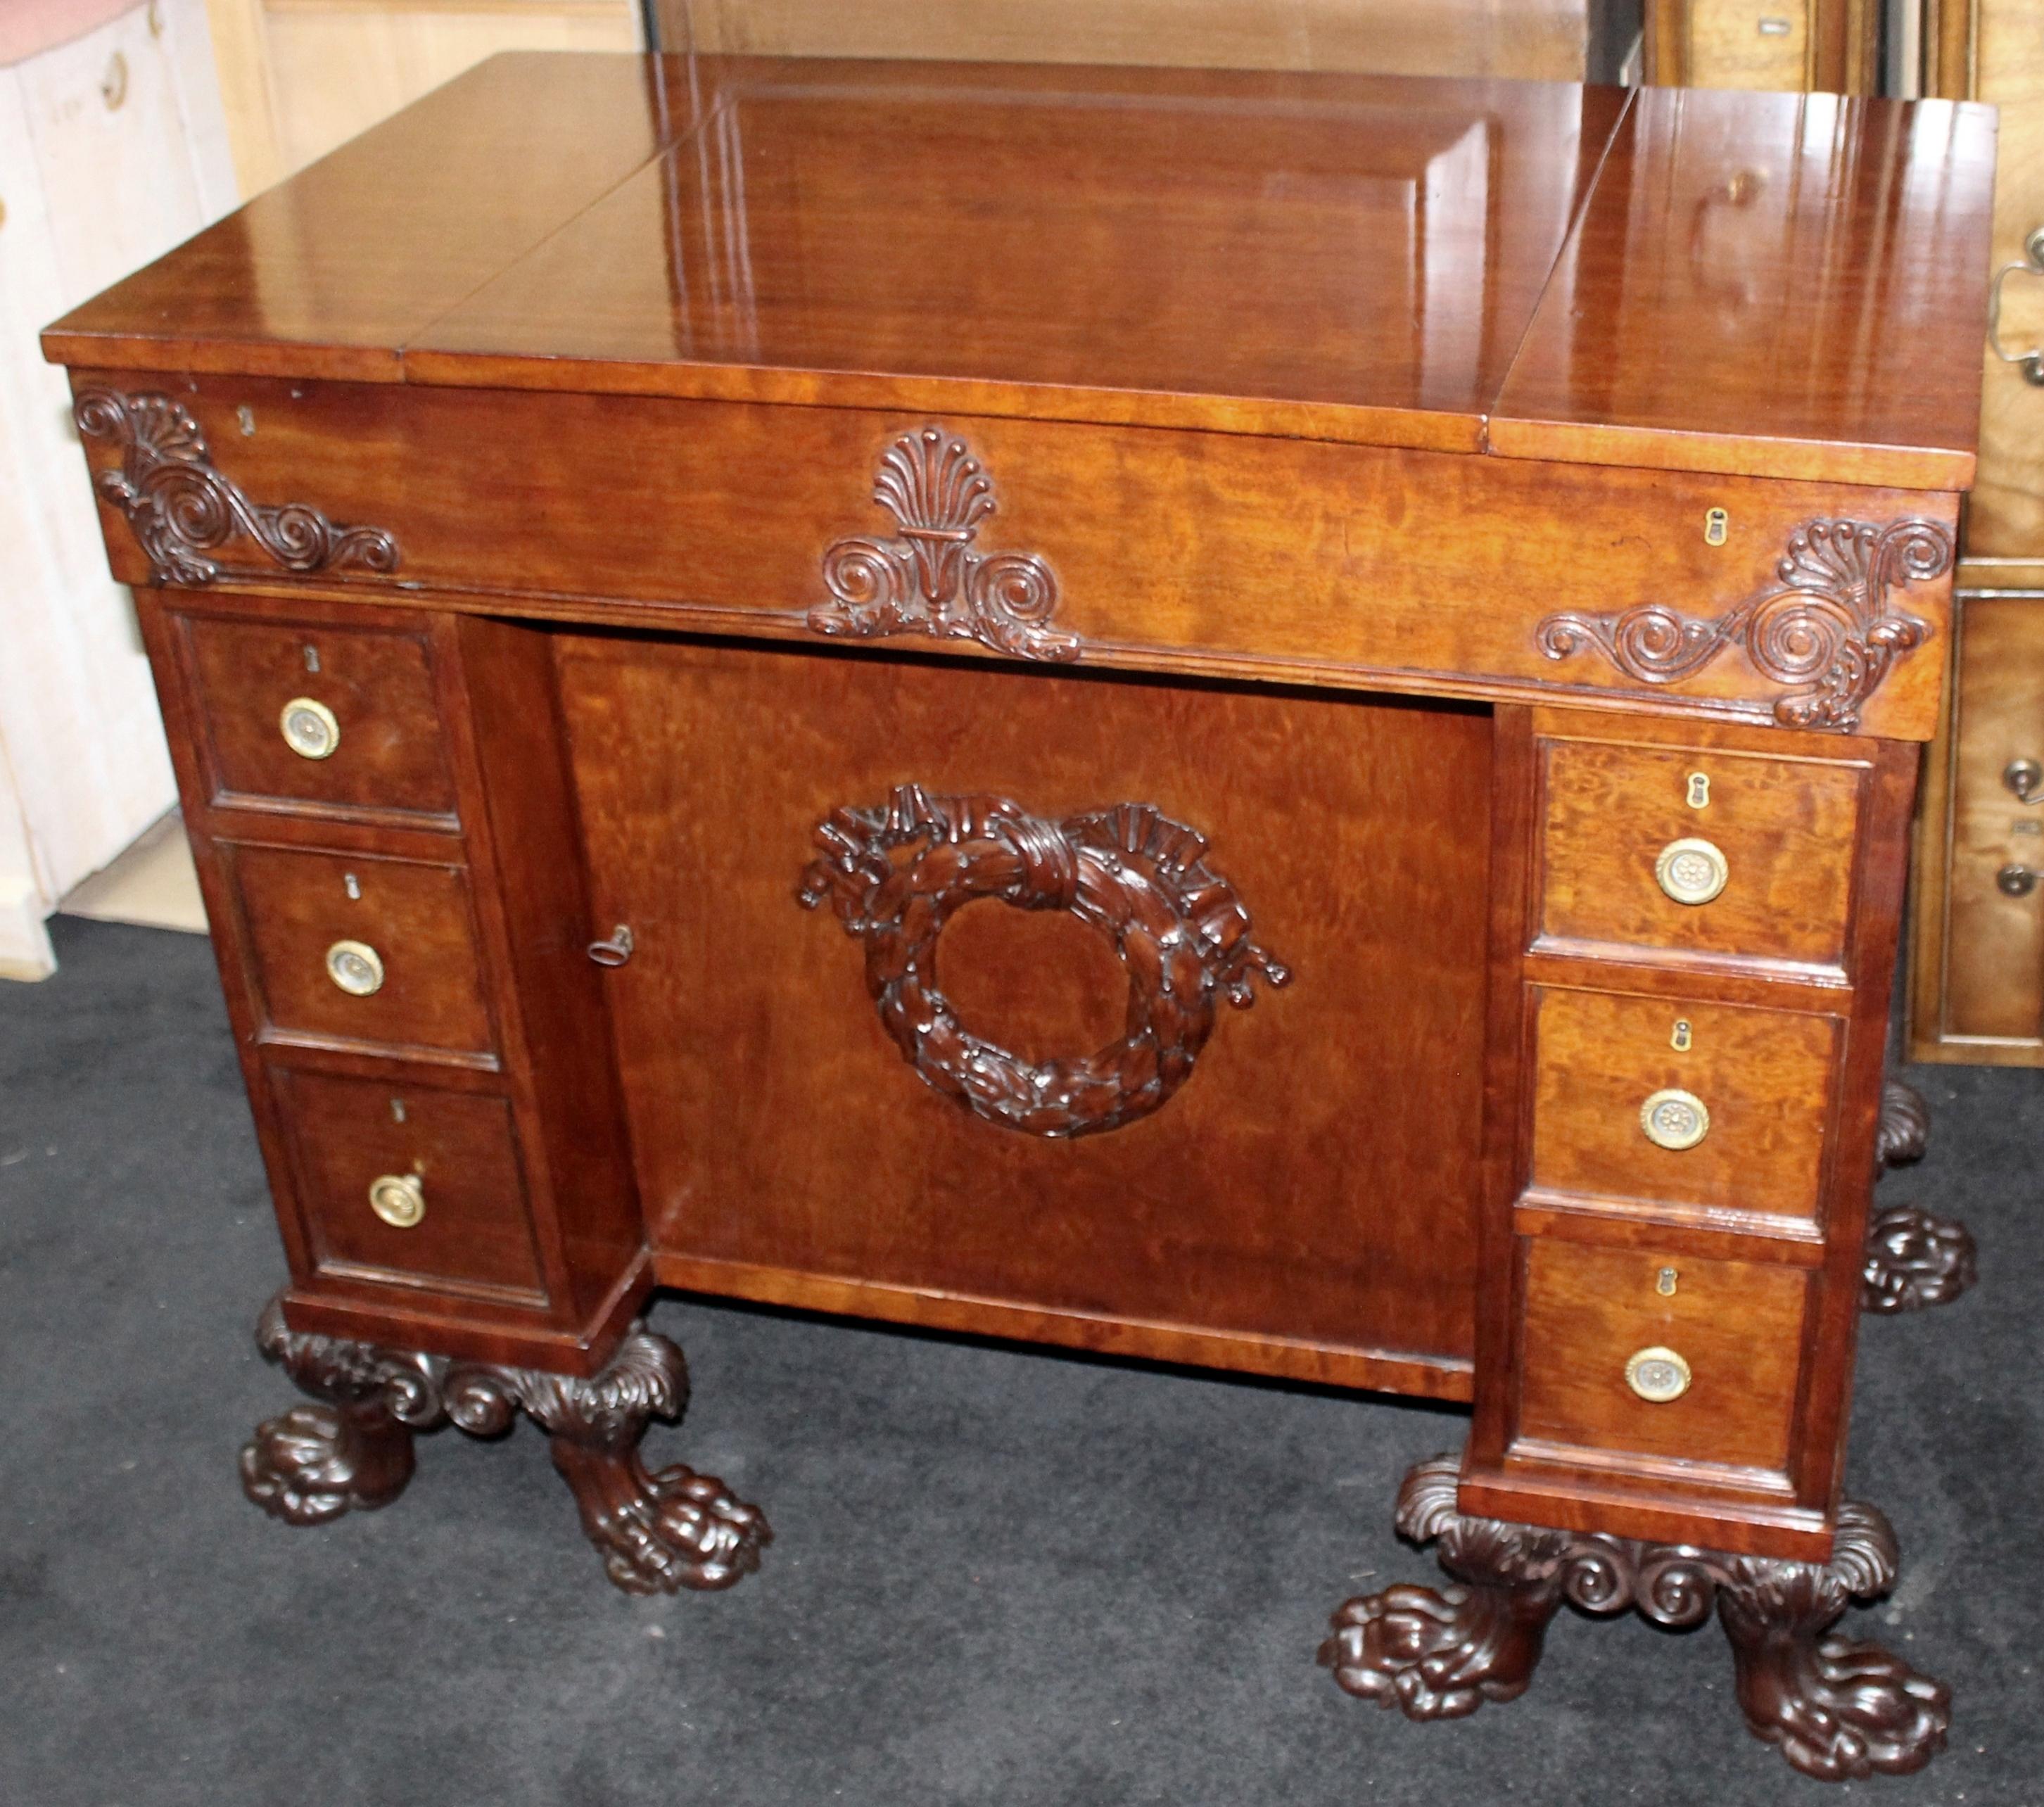 Fine Late 18th c. Mahogany desk with carved feet


Measures: Width 93 cm 36 1/2 in

Depth 52 cm 20 1/2 in

Height 79 cm 31 in
 

Period Late 18th c.

Wood mahogany

Condition Excellent condition. Restored split to top and repair to one